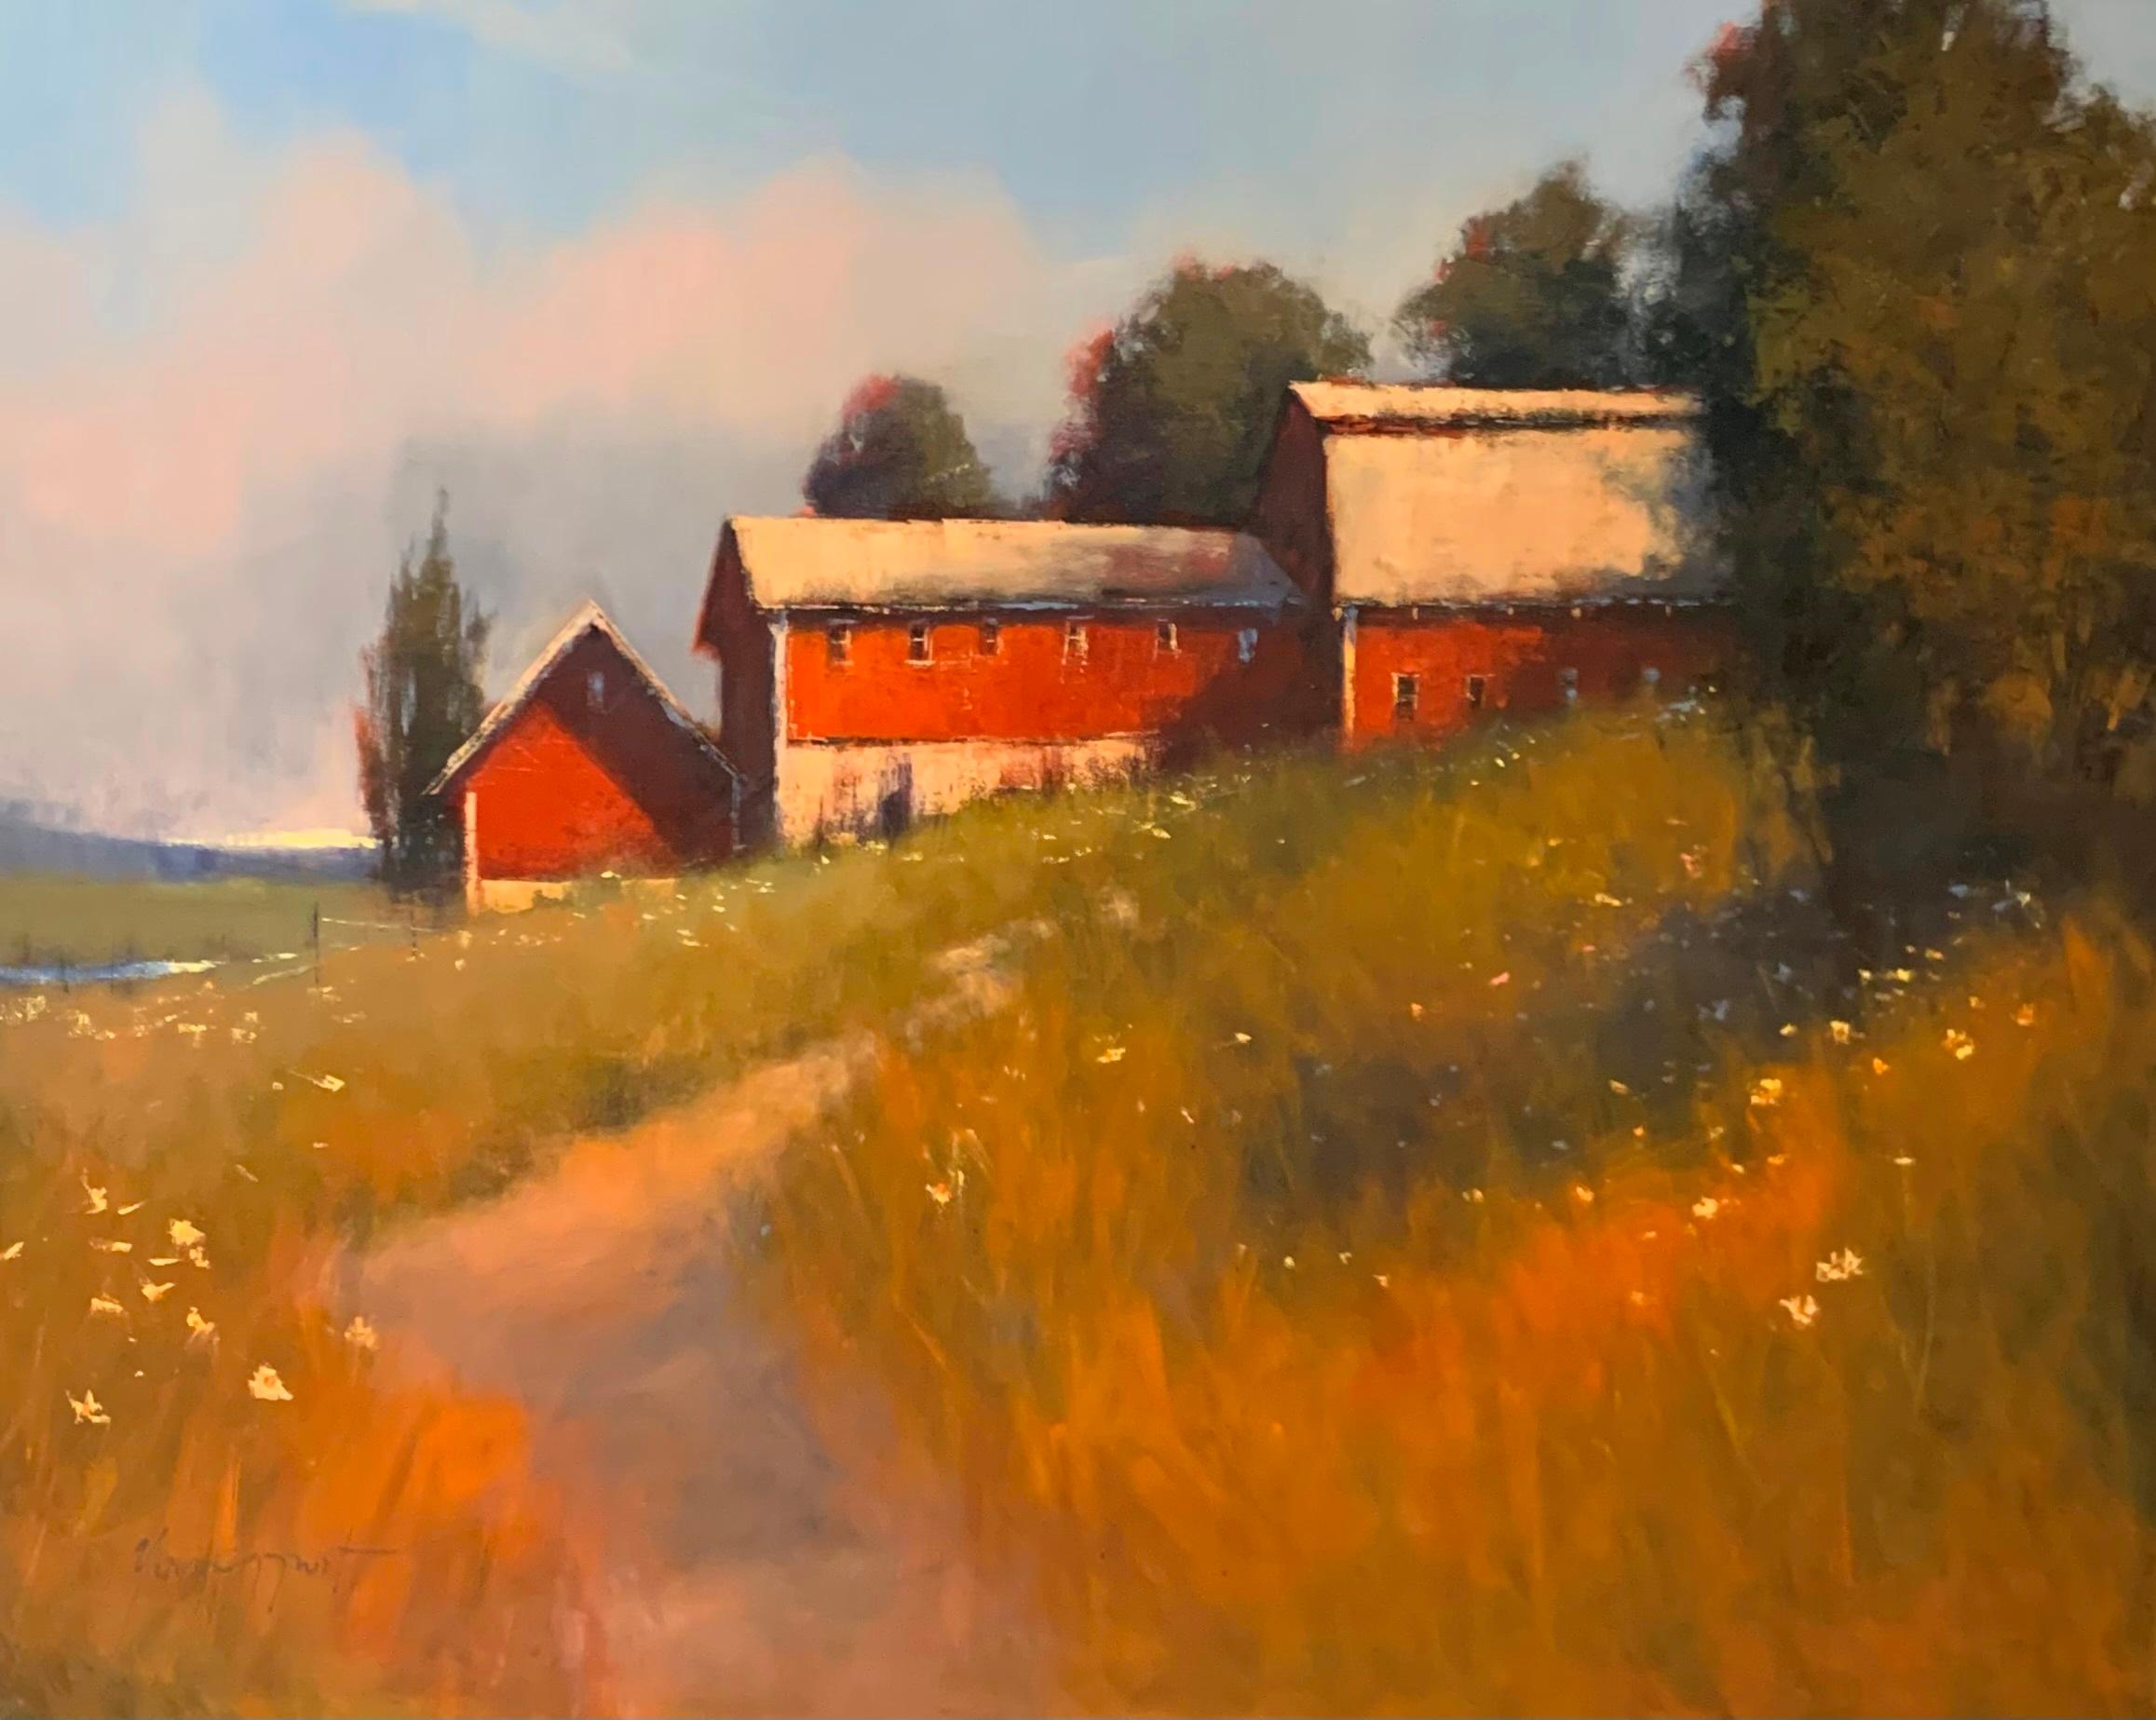 Romona Youngquist, Landscape Painting - "Three Barns"